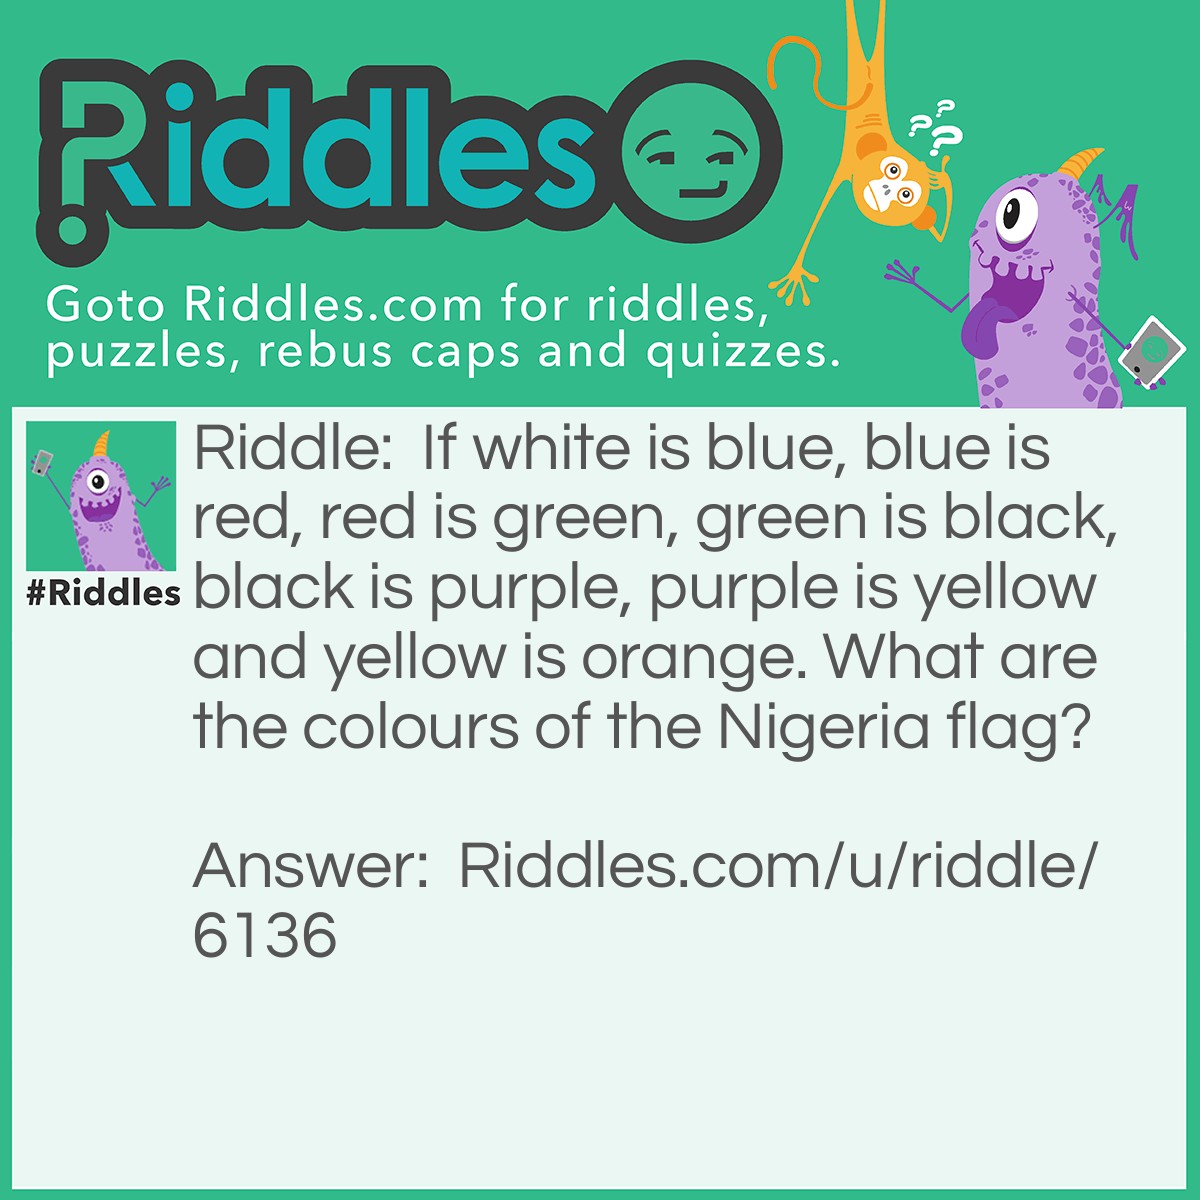 Riddle: If white is blue, blue is red, red is green, green is black, black is purple, purple is yellow and yellow is orange. What are the colours of the Nigeria flag? Answer: Black & Blue. EXPLANATION: the colours of Nigeria flag are green and white, but from the above, it is said that green is black while white is blue. So, the colours would be black and blue. Got it!